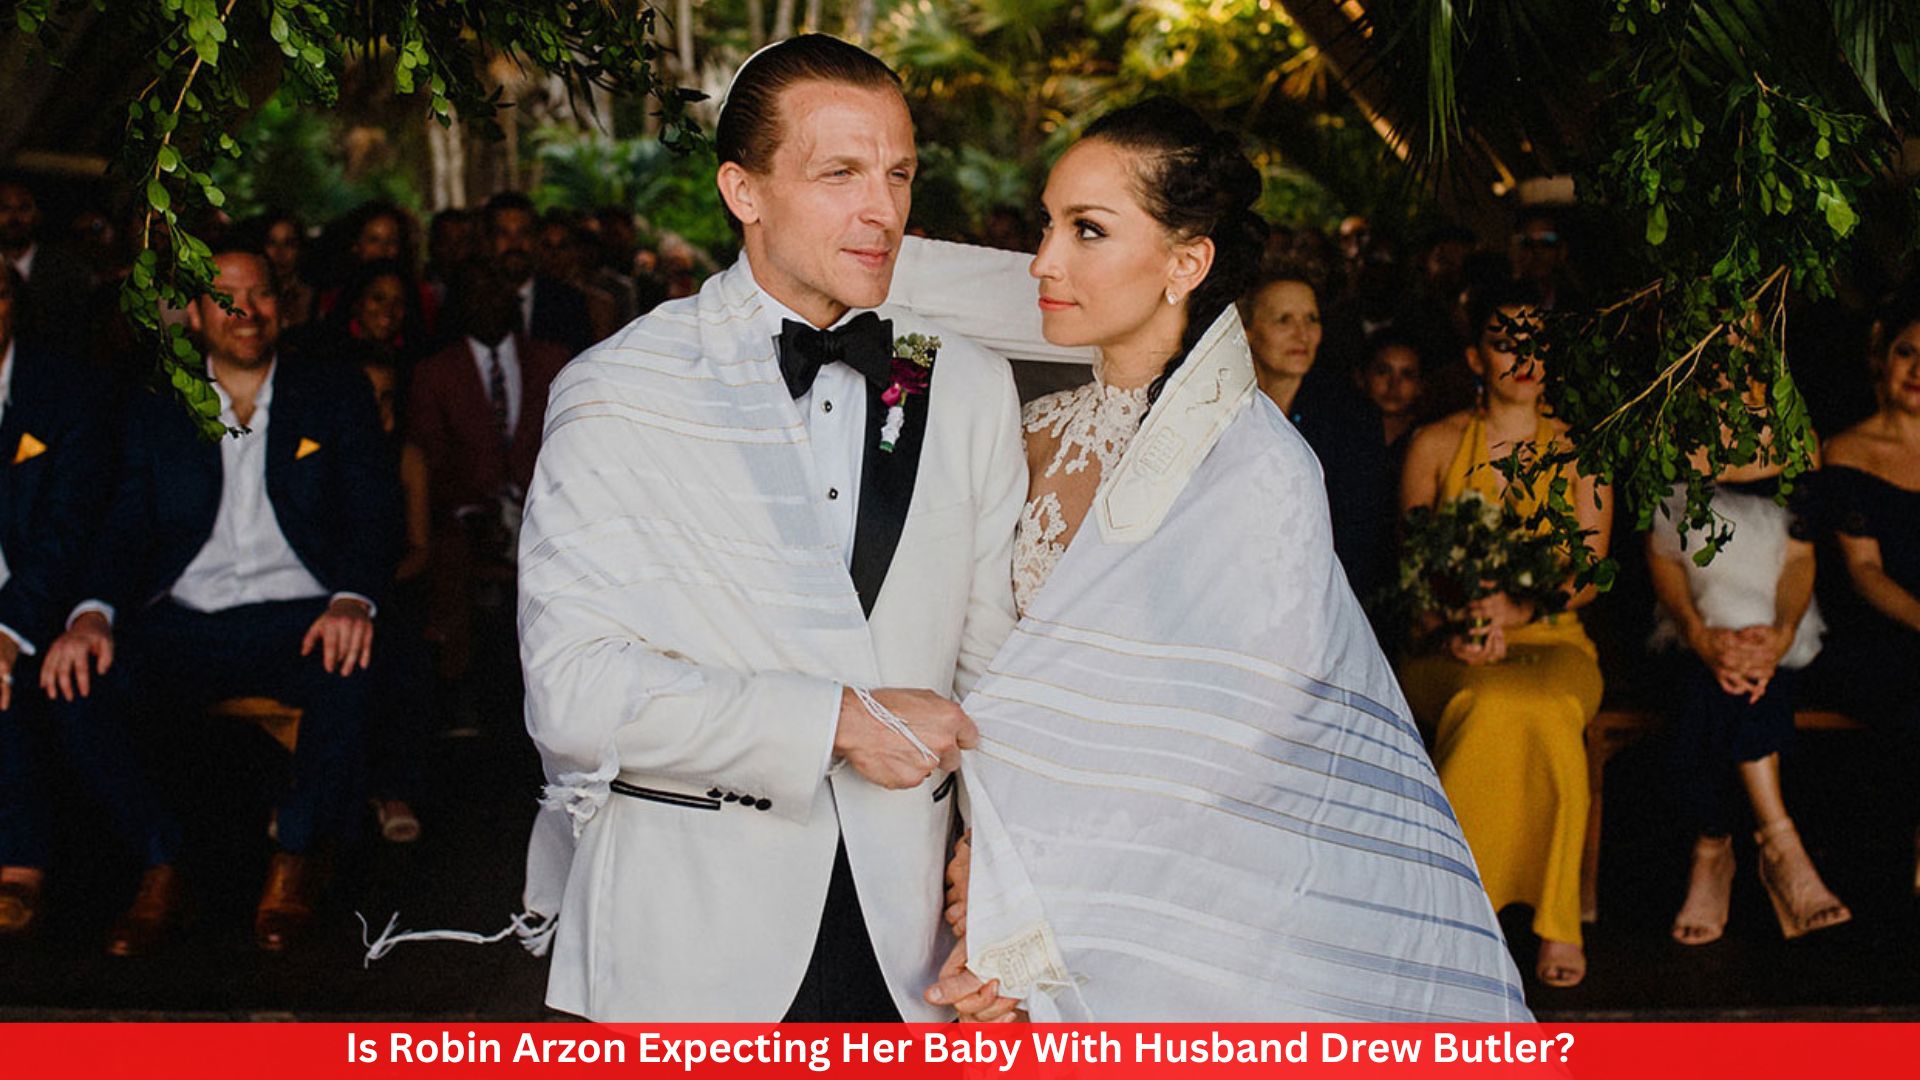 Is Robin Arzon Expecting Her Baby With Husband Drew Butler?